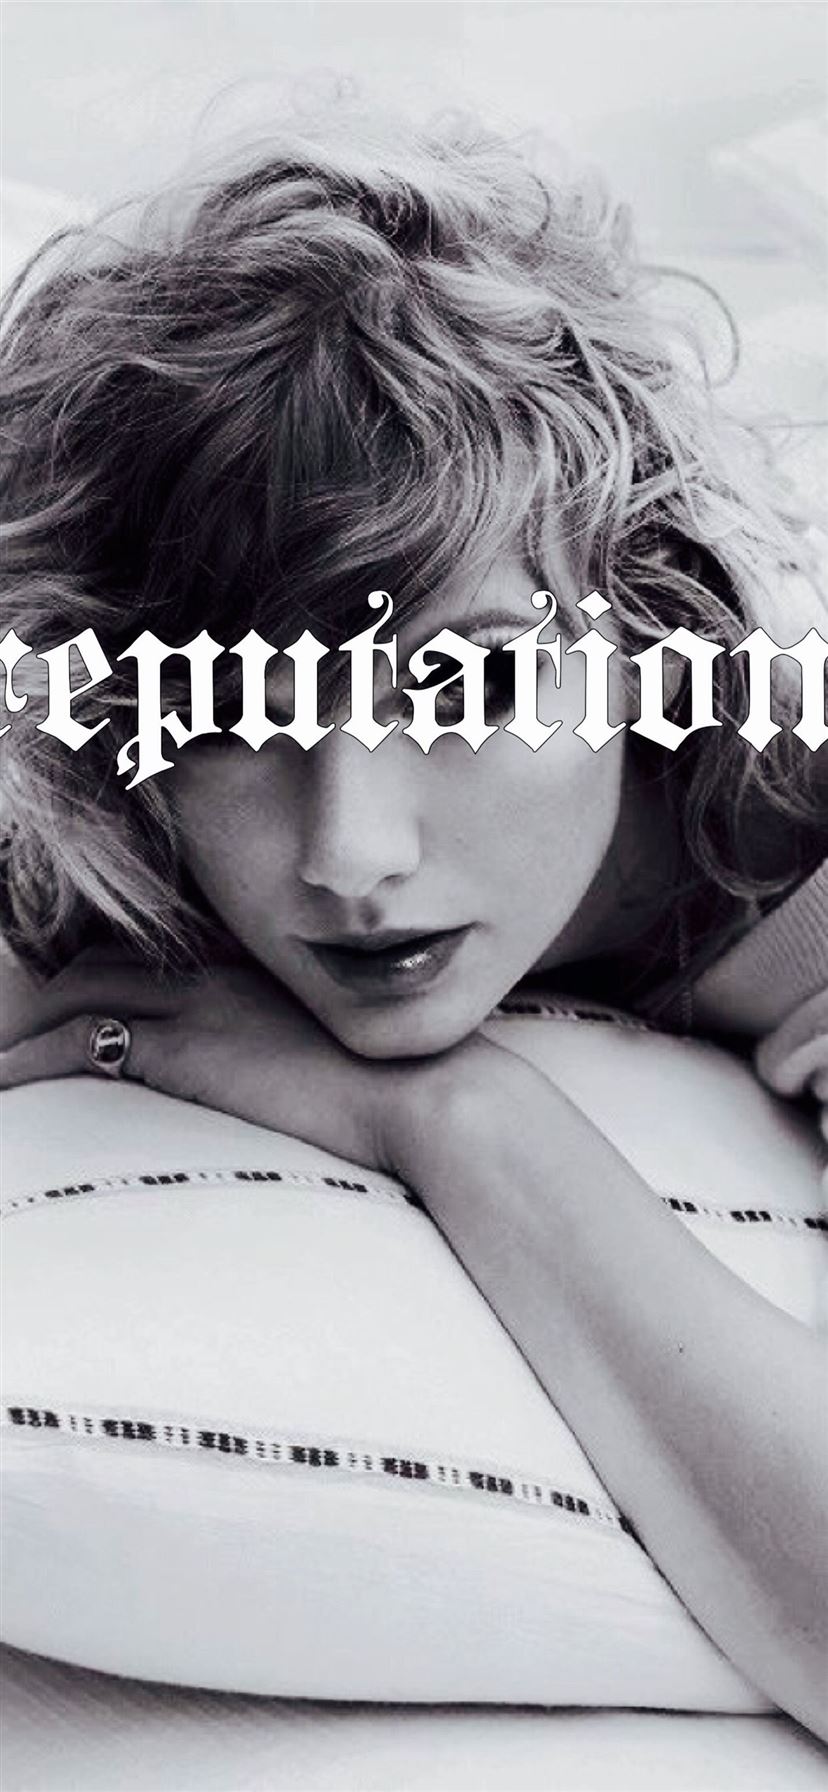 Taylor Swift Reputation Wallpapers